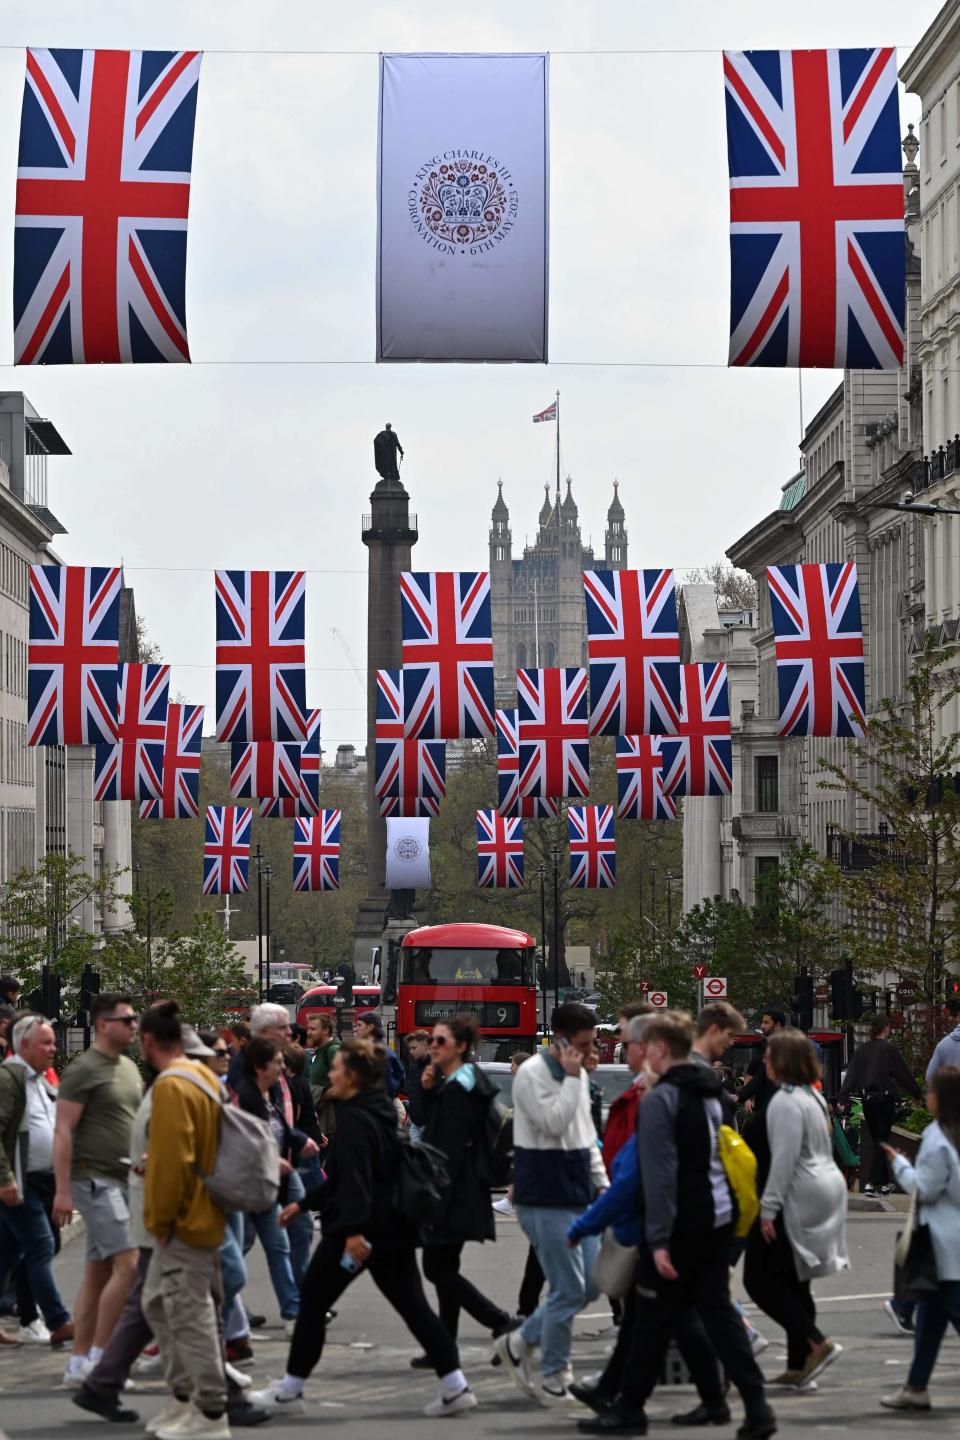 People walk beneath Union flags and Coronation Emblem flags in central London, on April 30, 2023, ahead of the coronation ceremony of Charles III and his wife, Camilla, as King and Queen of the United Kingdom and Commonwealth Realm nations, on May 6, 2023.